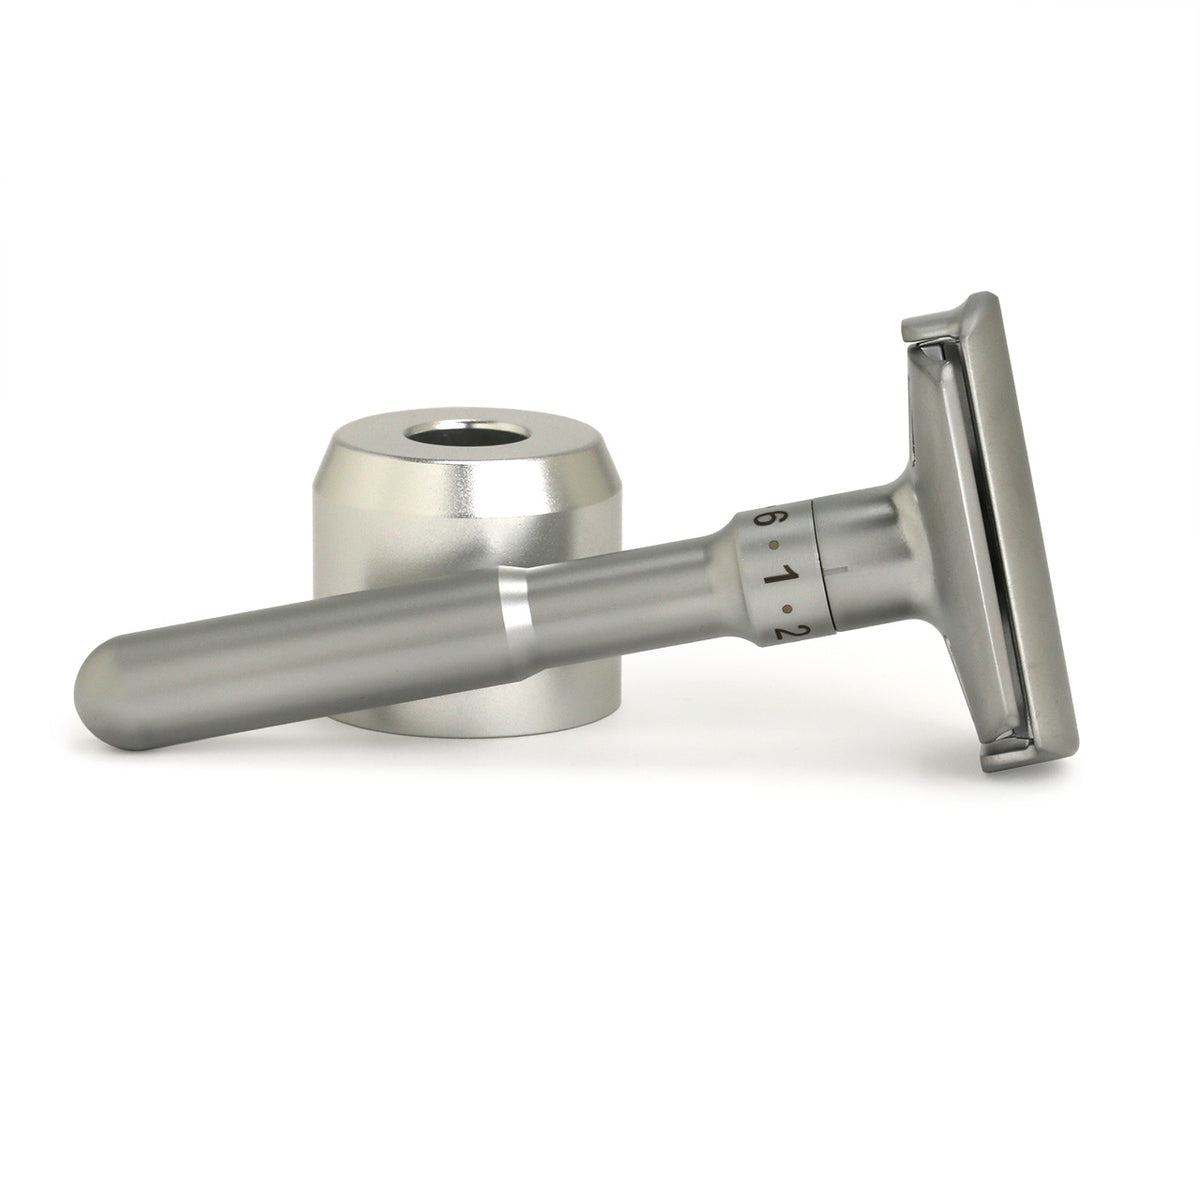 Adjustable safety razor with six settings in reclining position next to its stand base